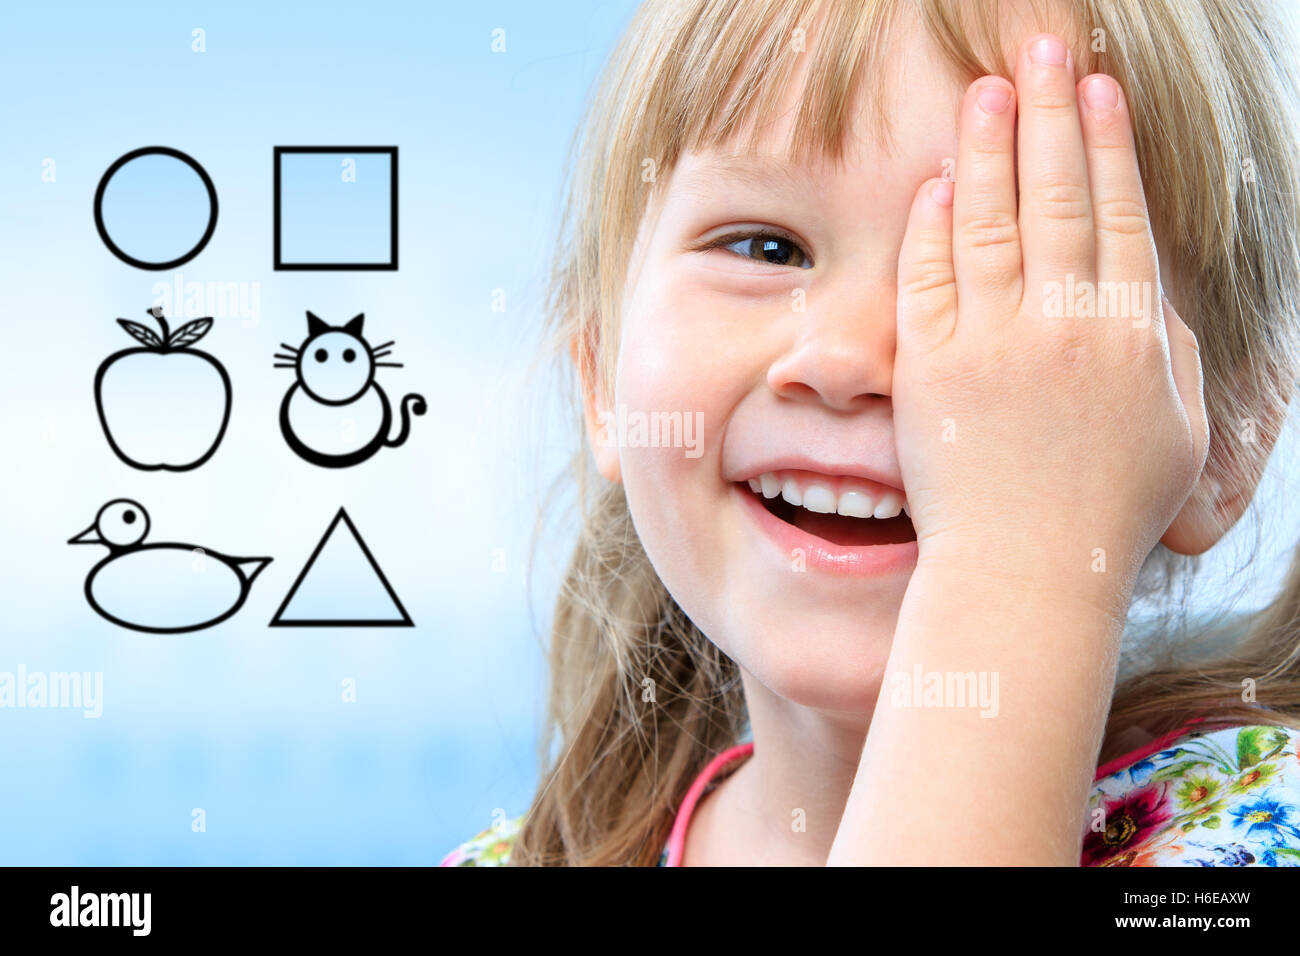 Close up face shot of little girl closing one eye with hand. Childish symbols in background as vision test chart. Stock Photo